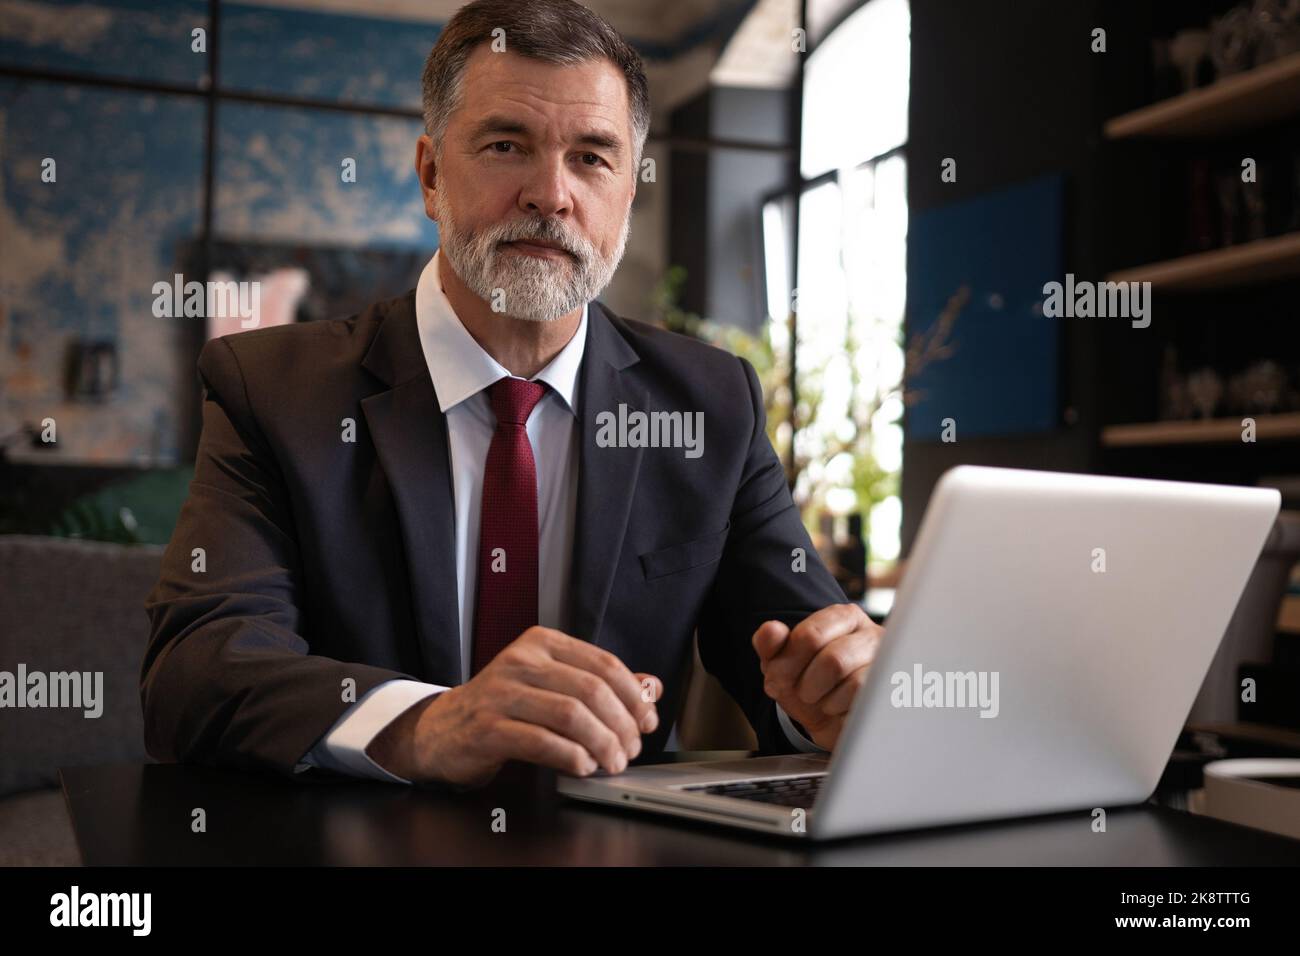 Mature businessman working on laptop. Handsome mature business leader sitting in a modern office Stock Photo